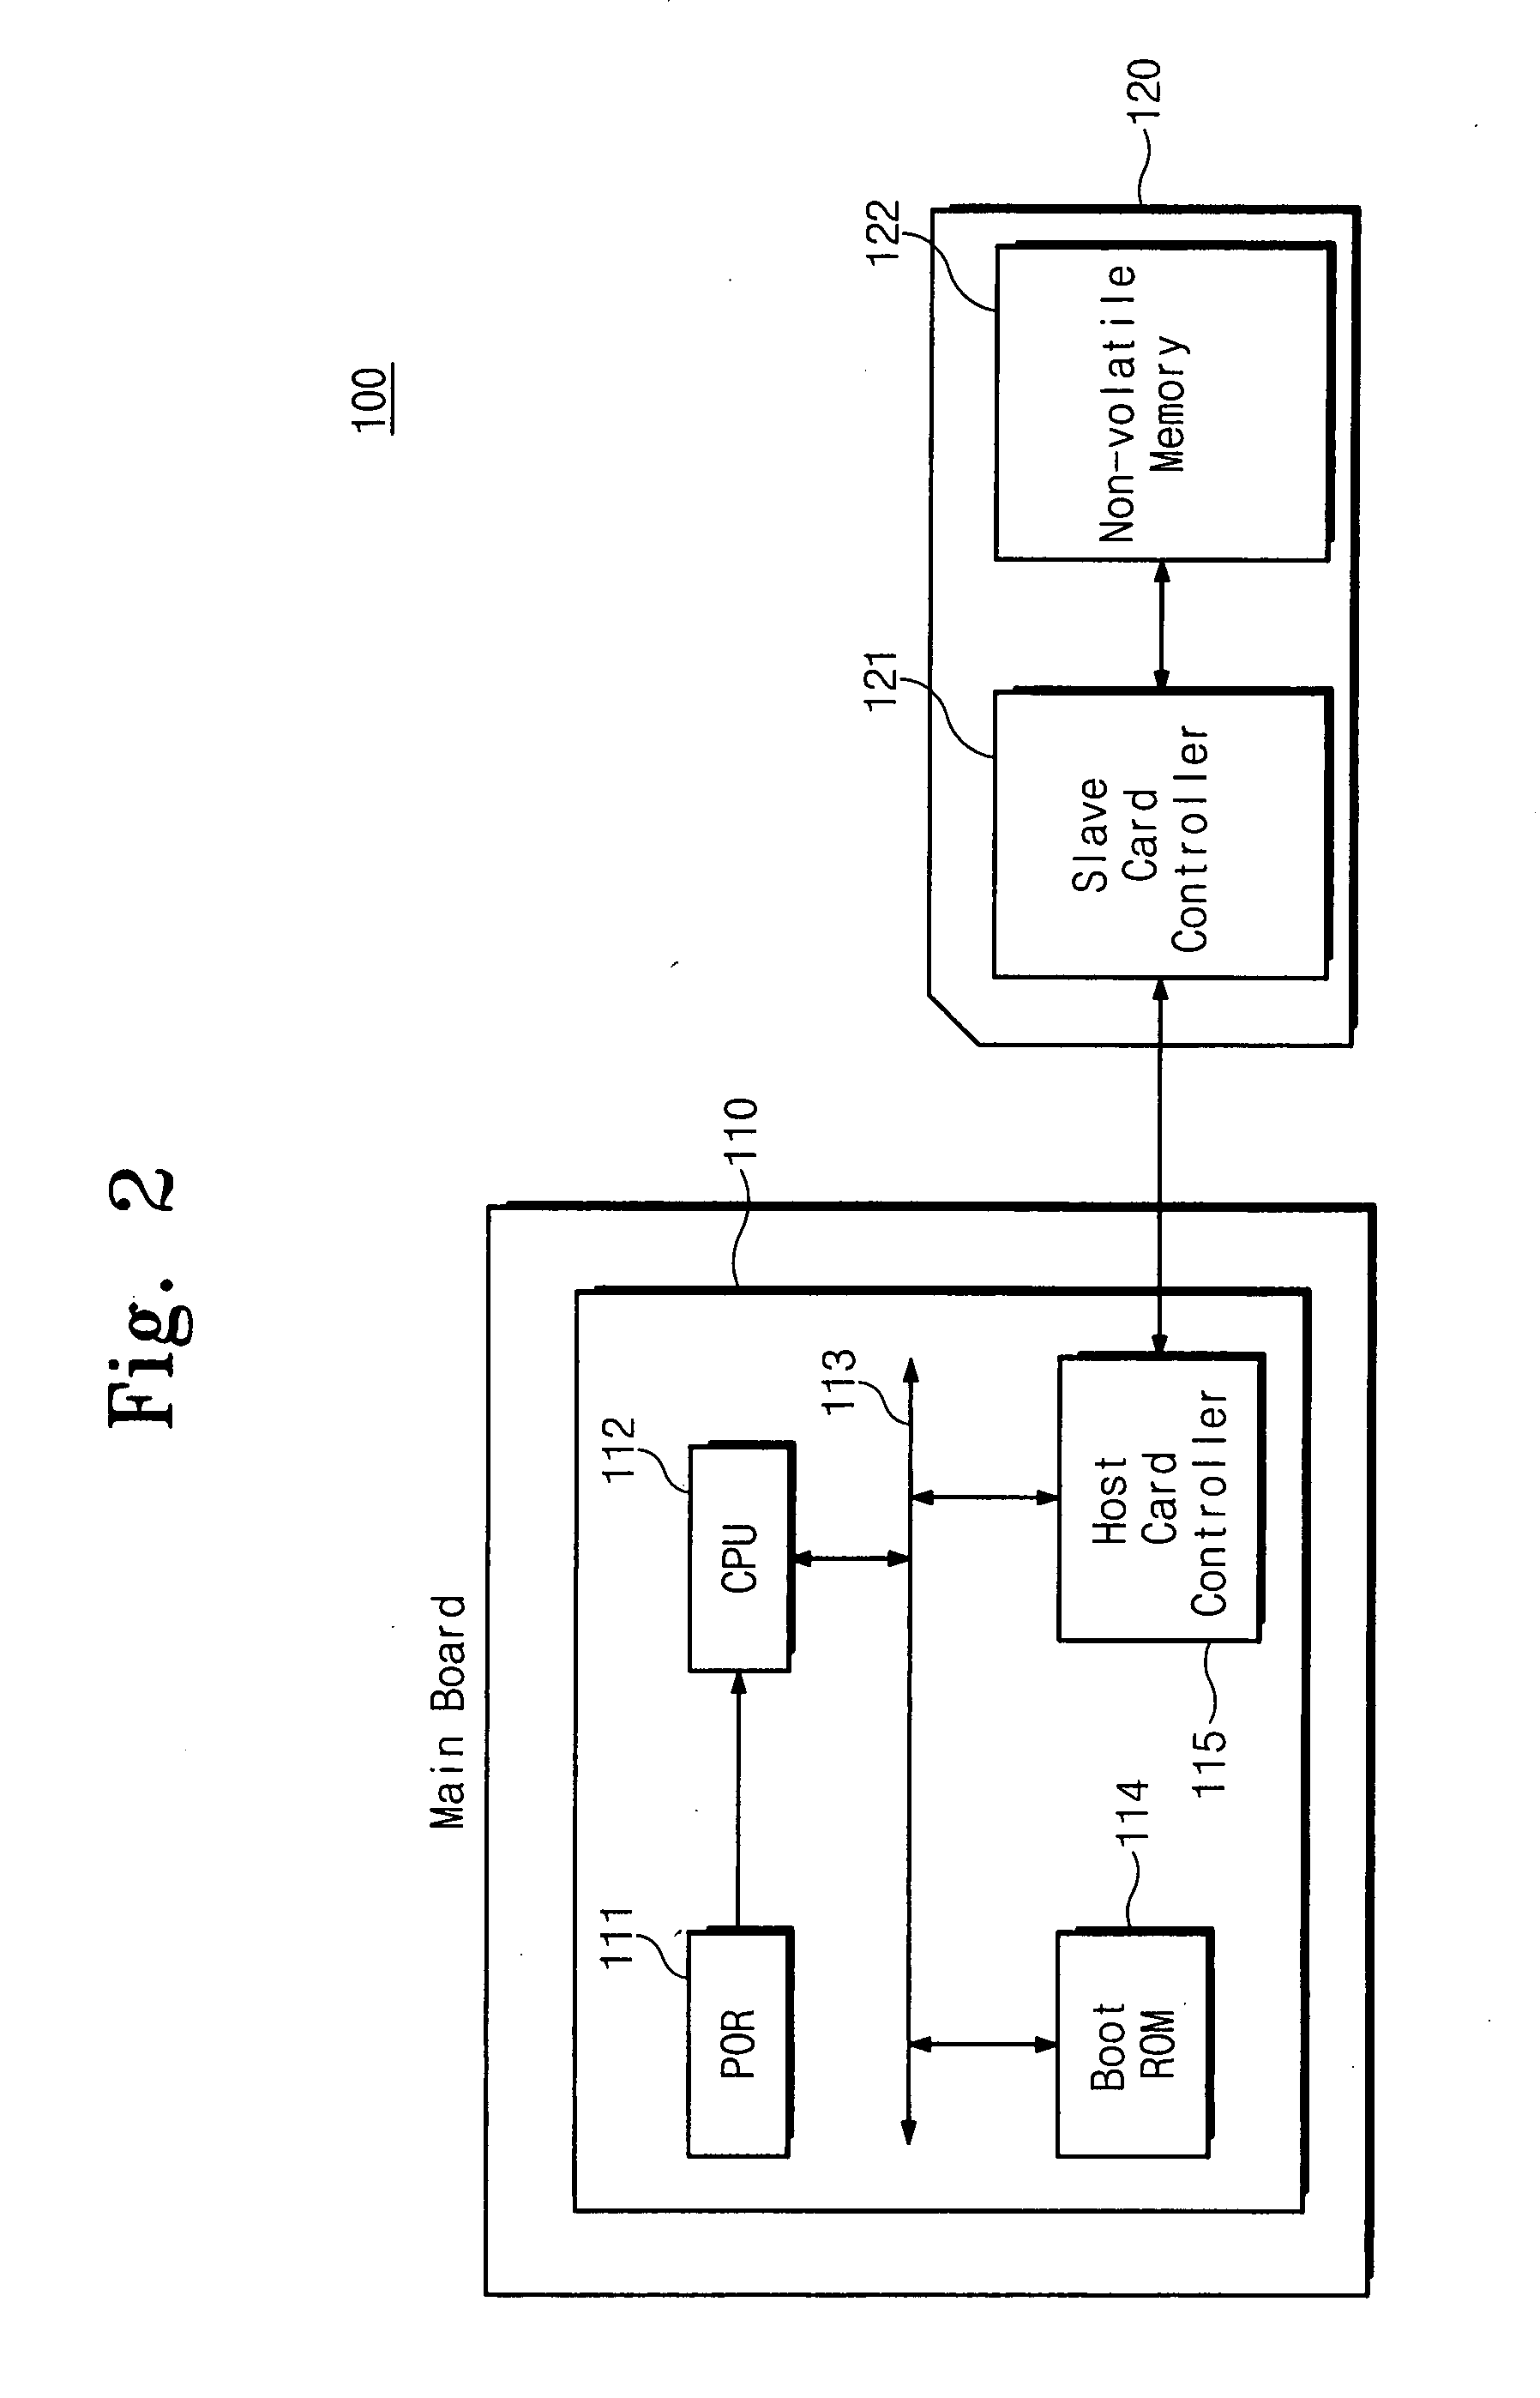 System comprising electronic device and external device storing boot code for booting system